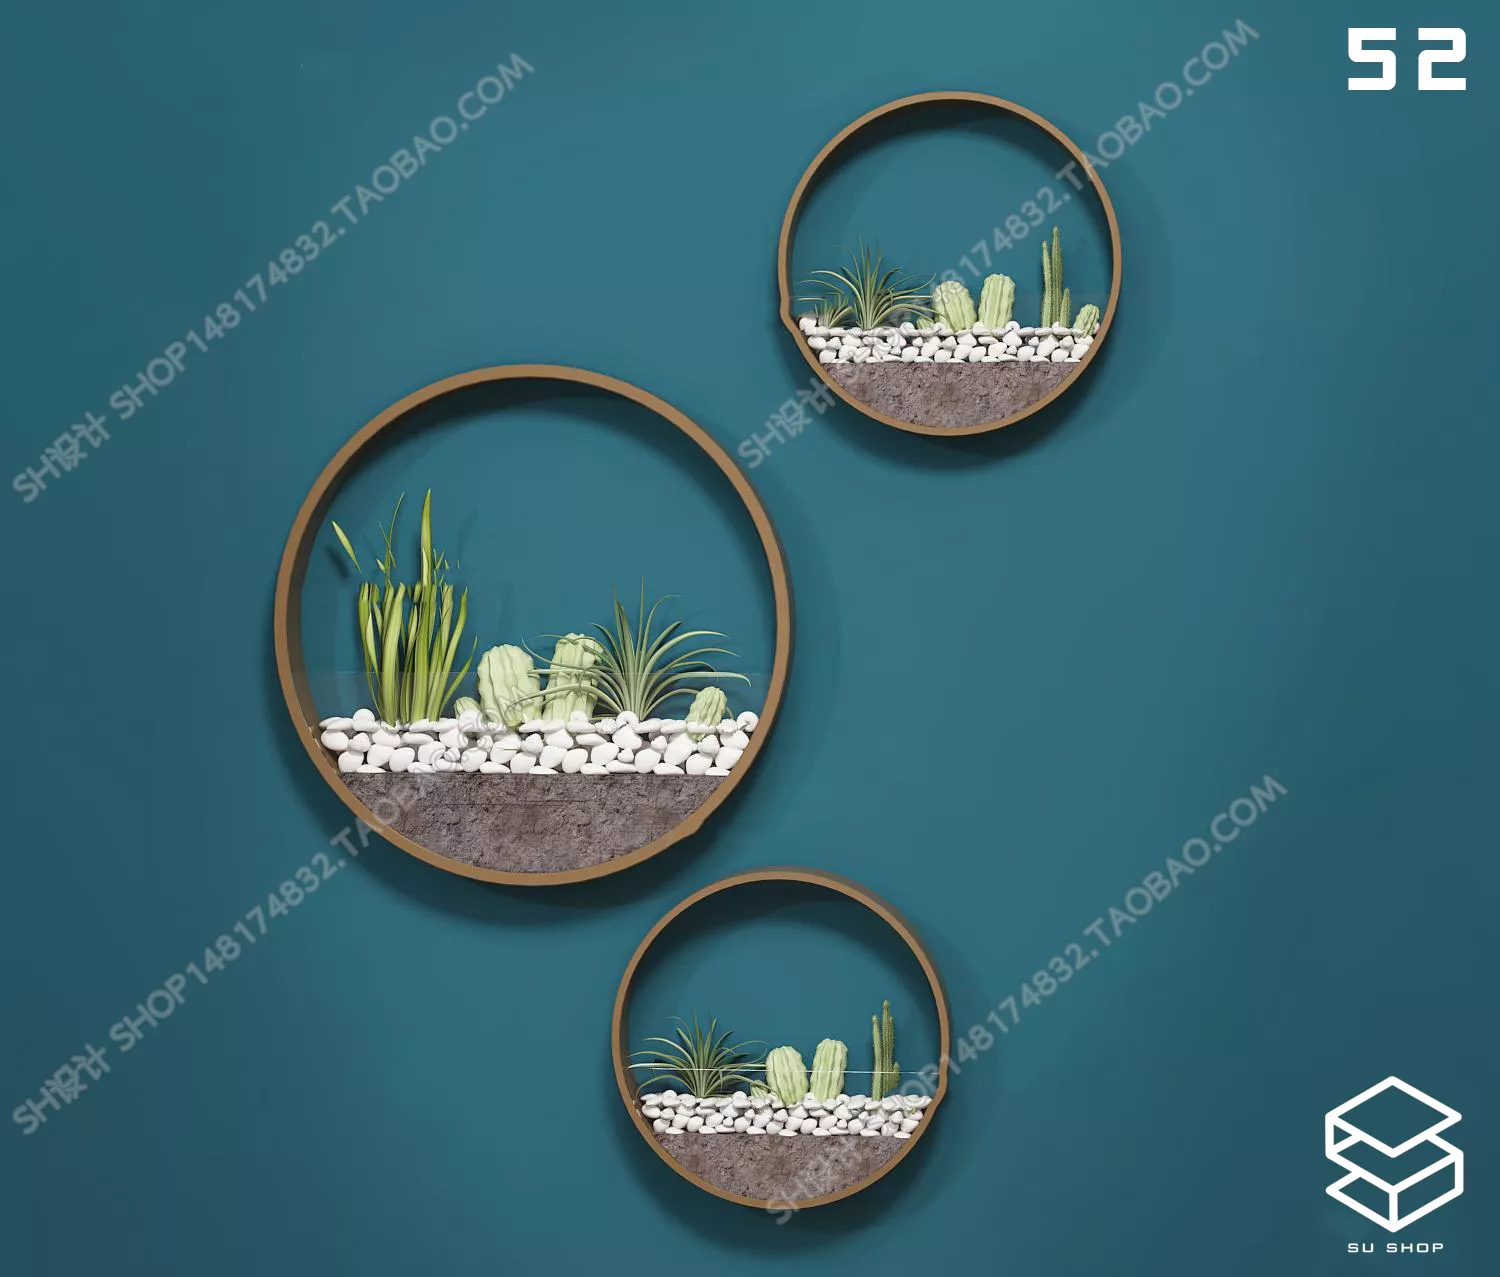 MODERN WALL DECOR - SKETCHUP 3D MODEL - VRAY OR ENSCAPE - ID15956